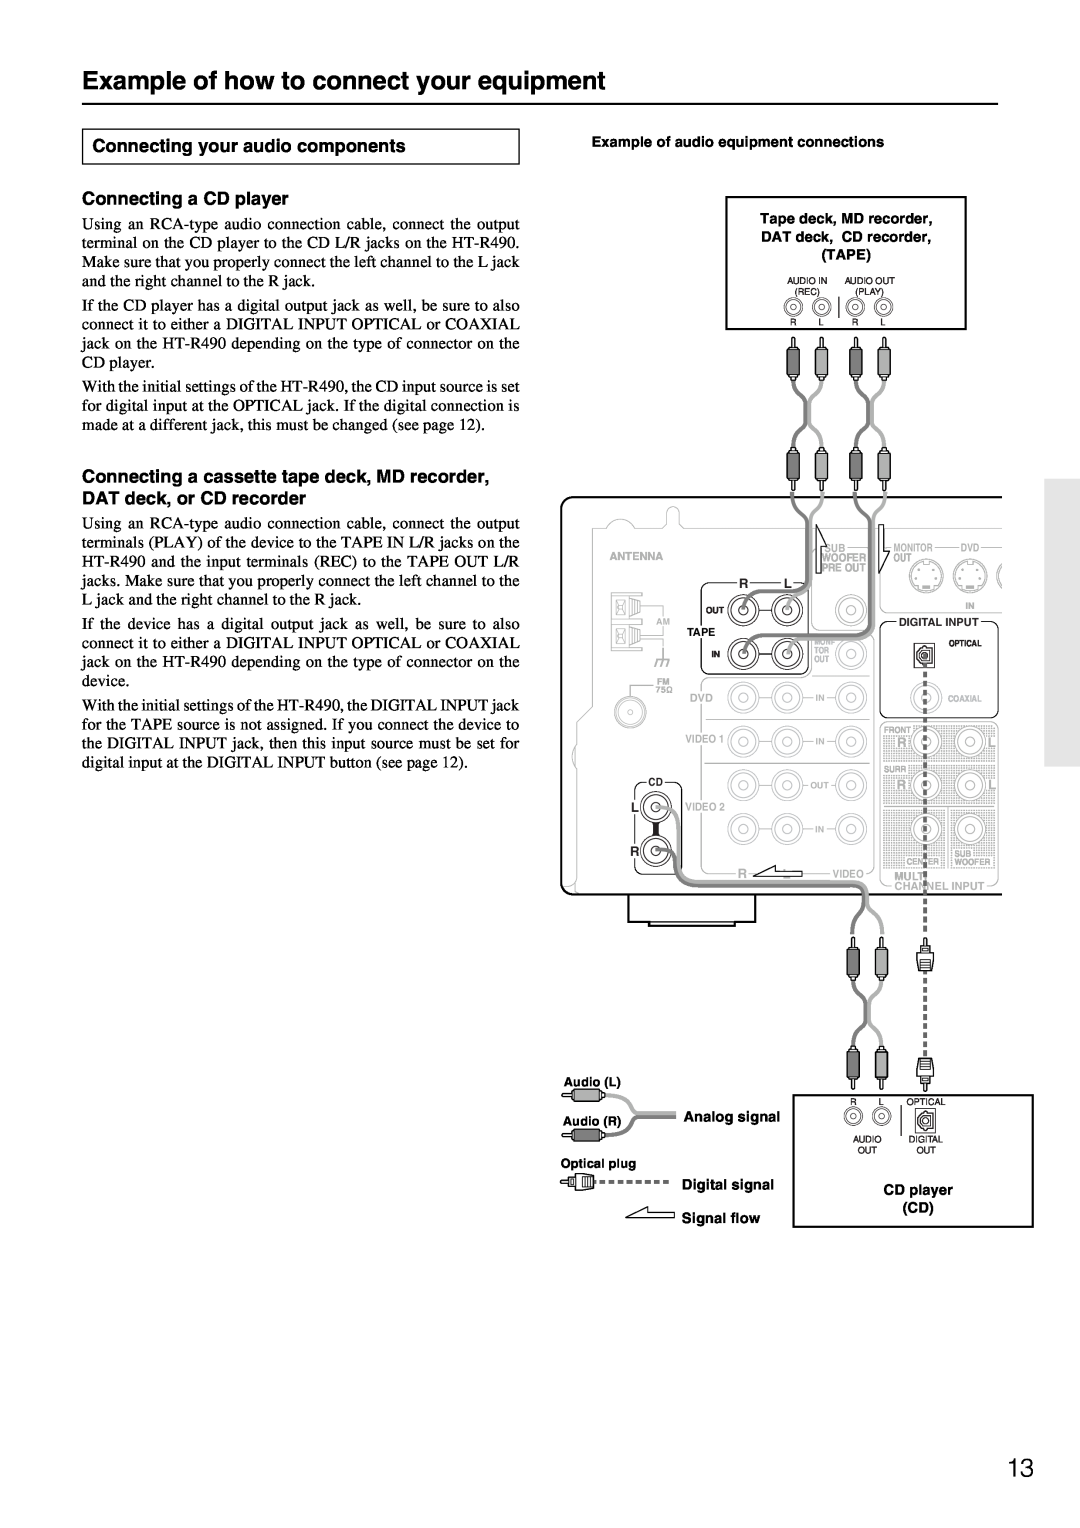 Onkyo HT-R490 appendix Example of how to connect your equipment, Connecting your audio components, Connecting a CD player 